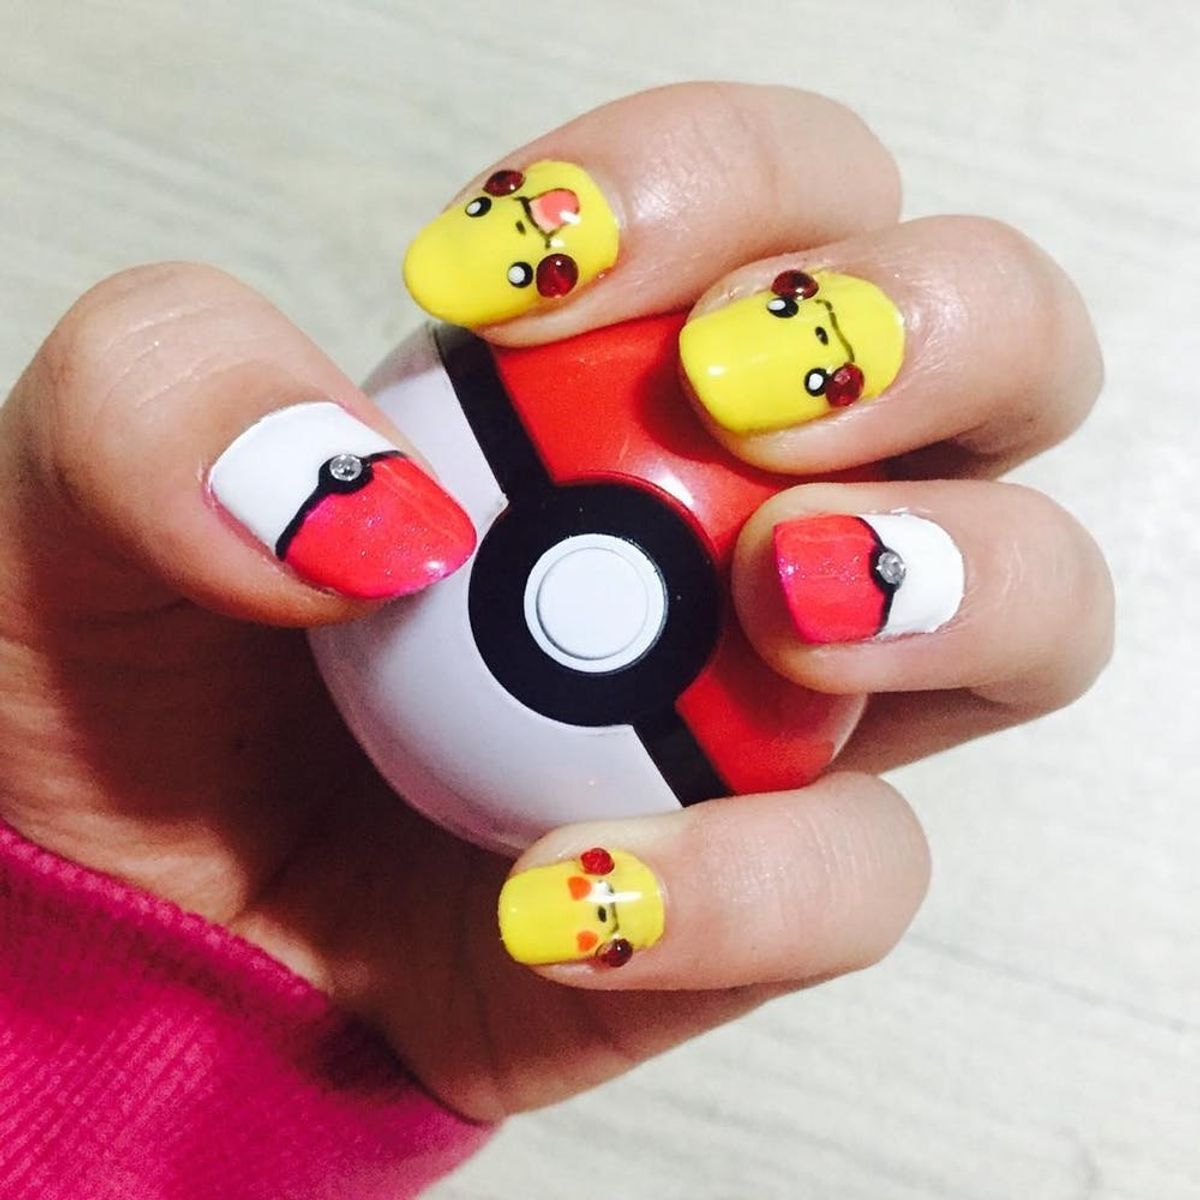 10 Pokemon Nails That Are Sure to Help You Catch ‘Em All